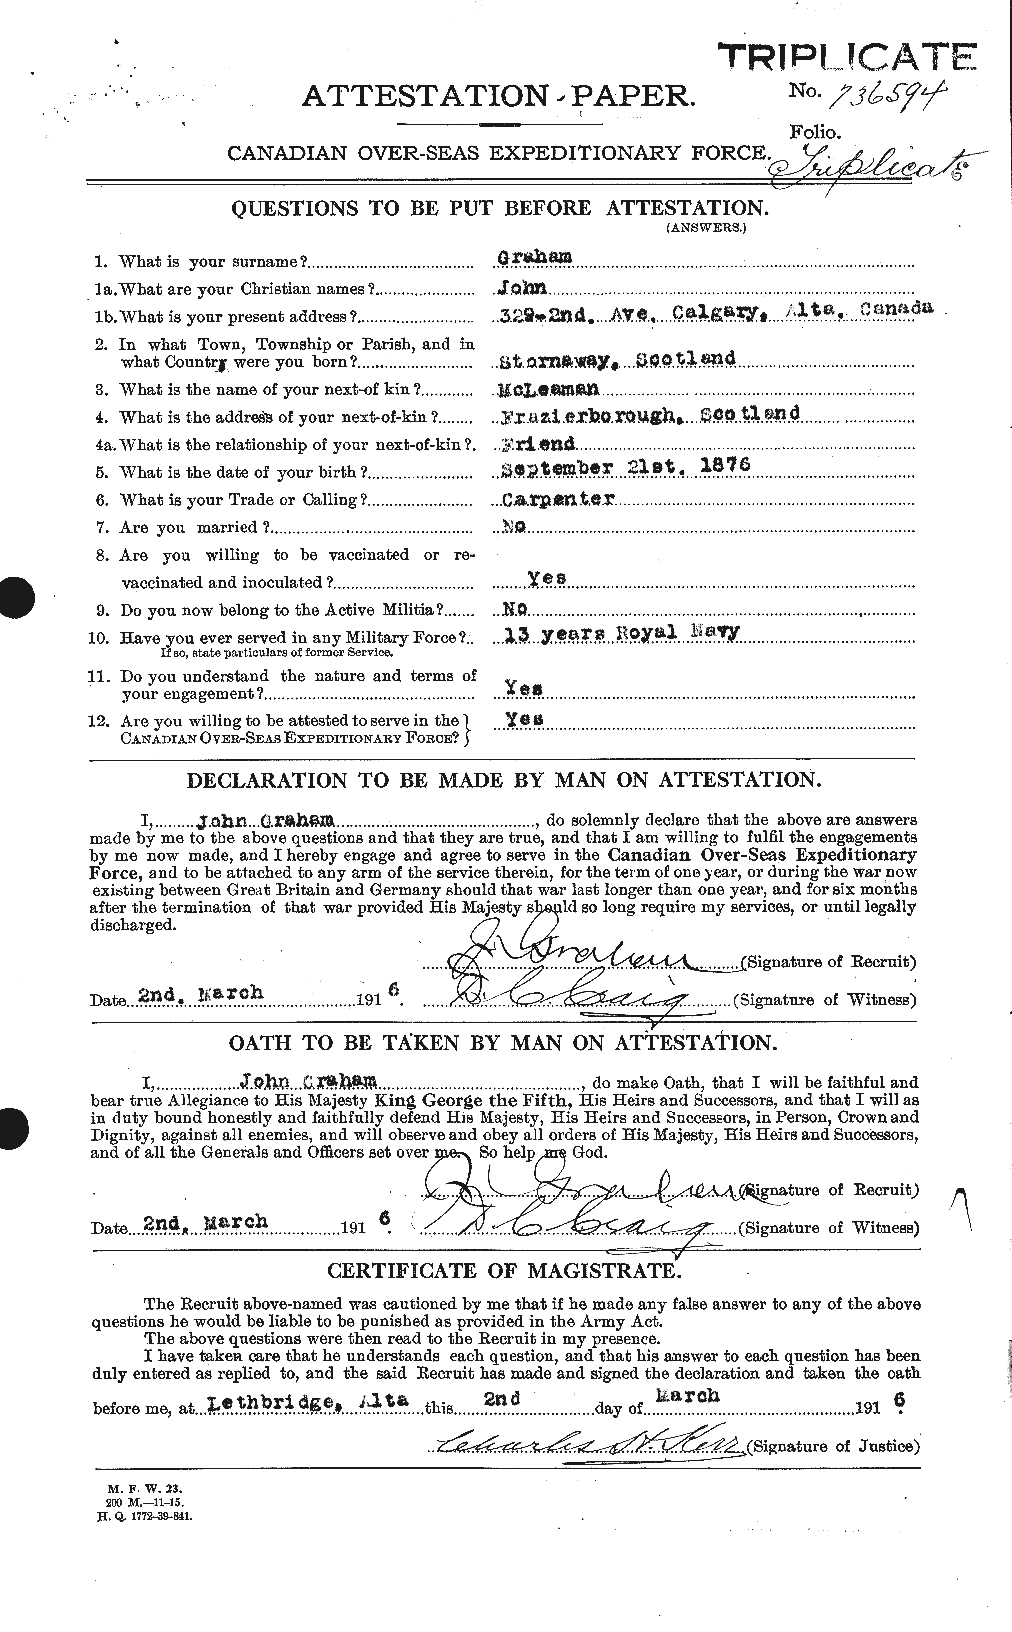 Personnel Records of the First World War - CEF 359143a